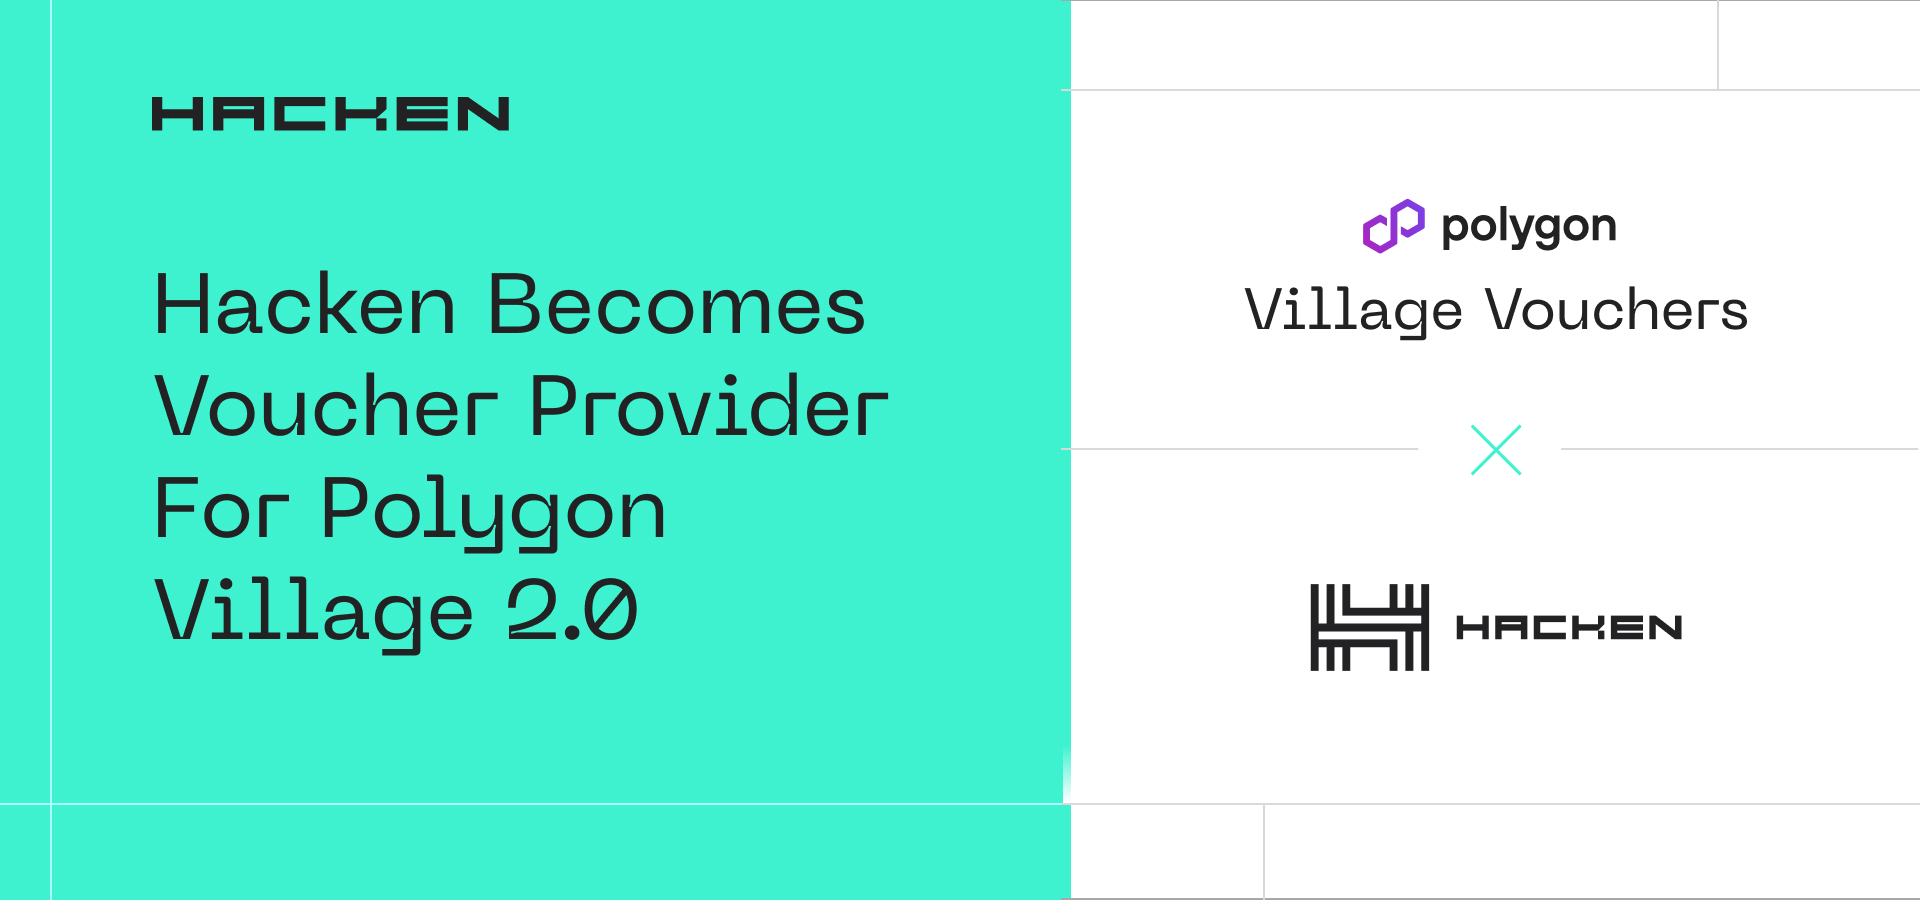 Hacken’s Ongoing Commitment as Voucher Provider for Polygon Village 2.0